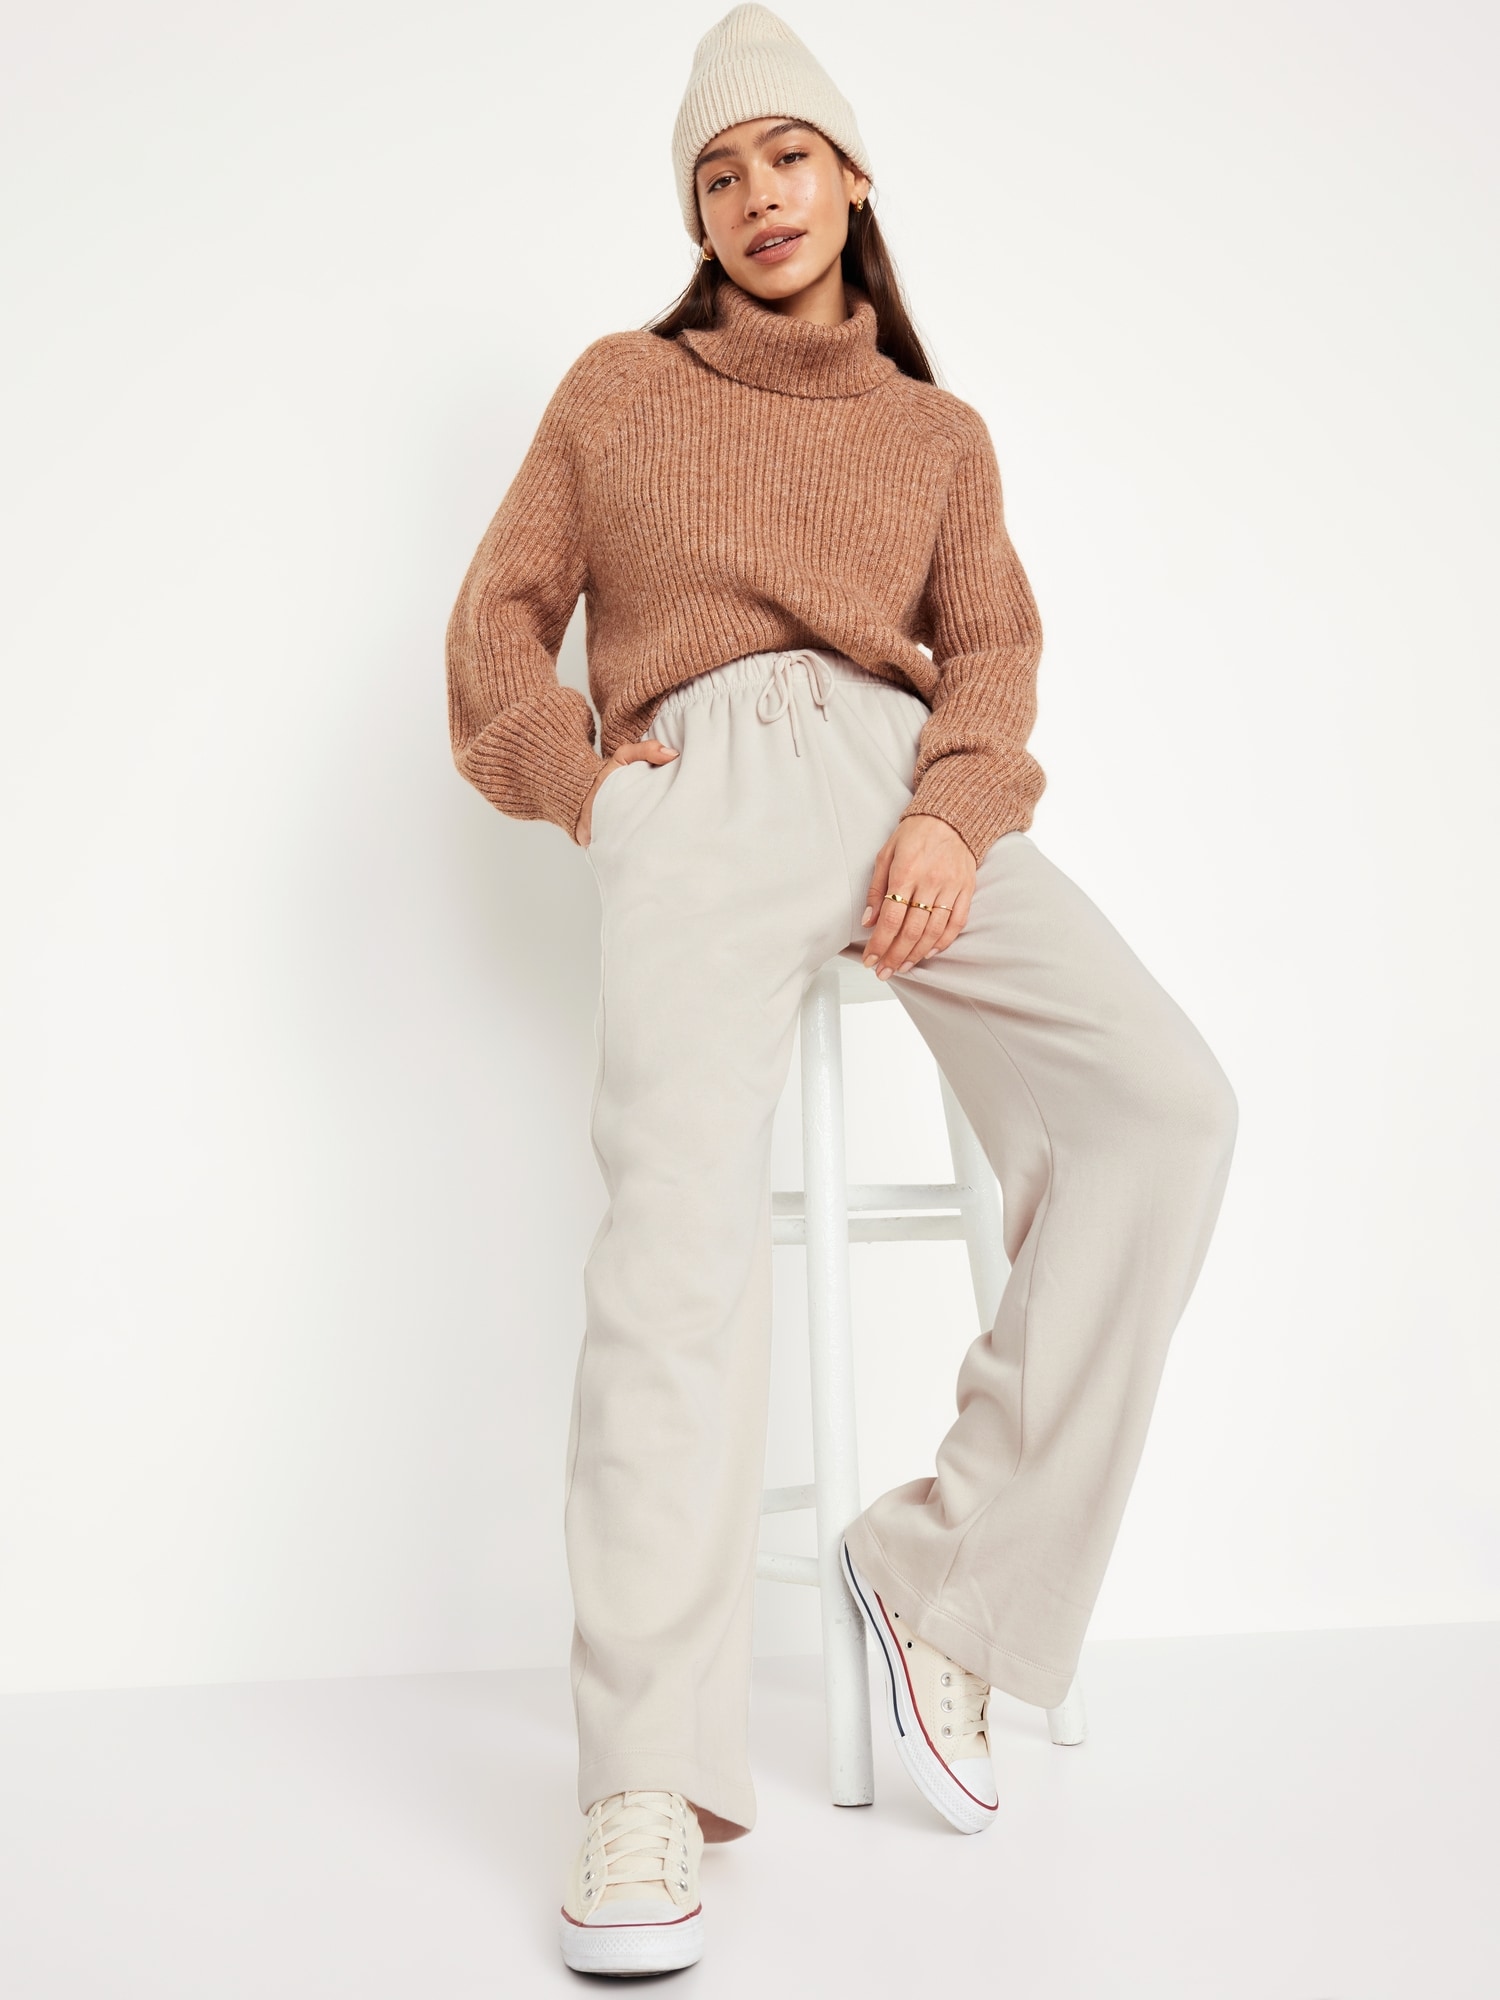 Extra High-Waisted Vintage Sweatpants | Old Navy